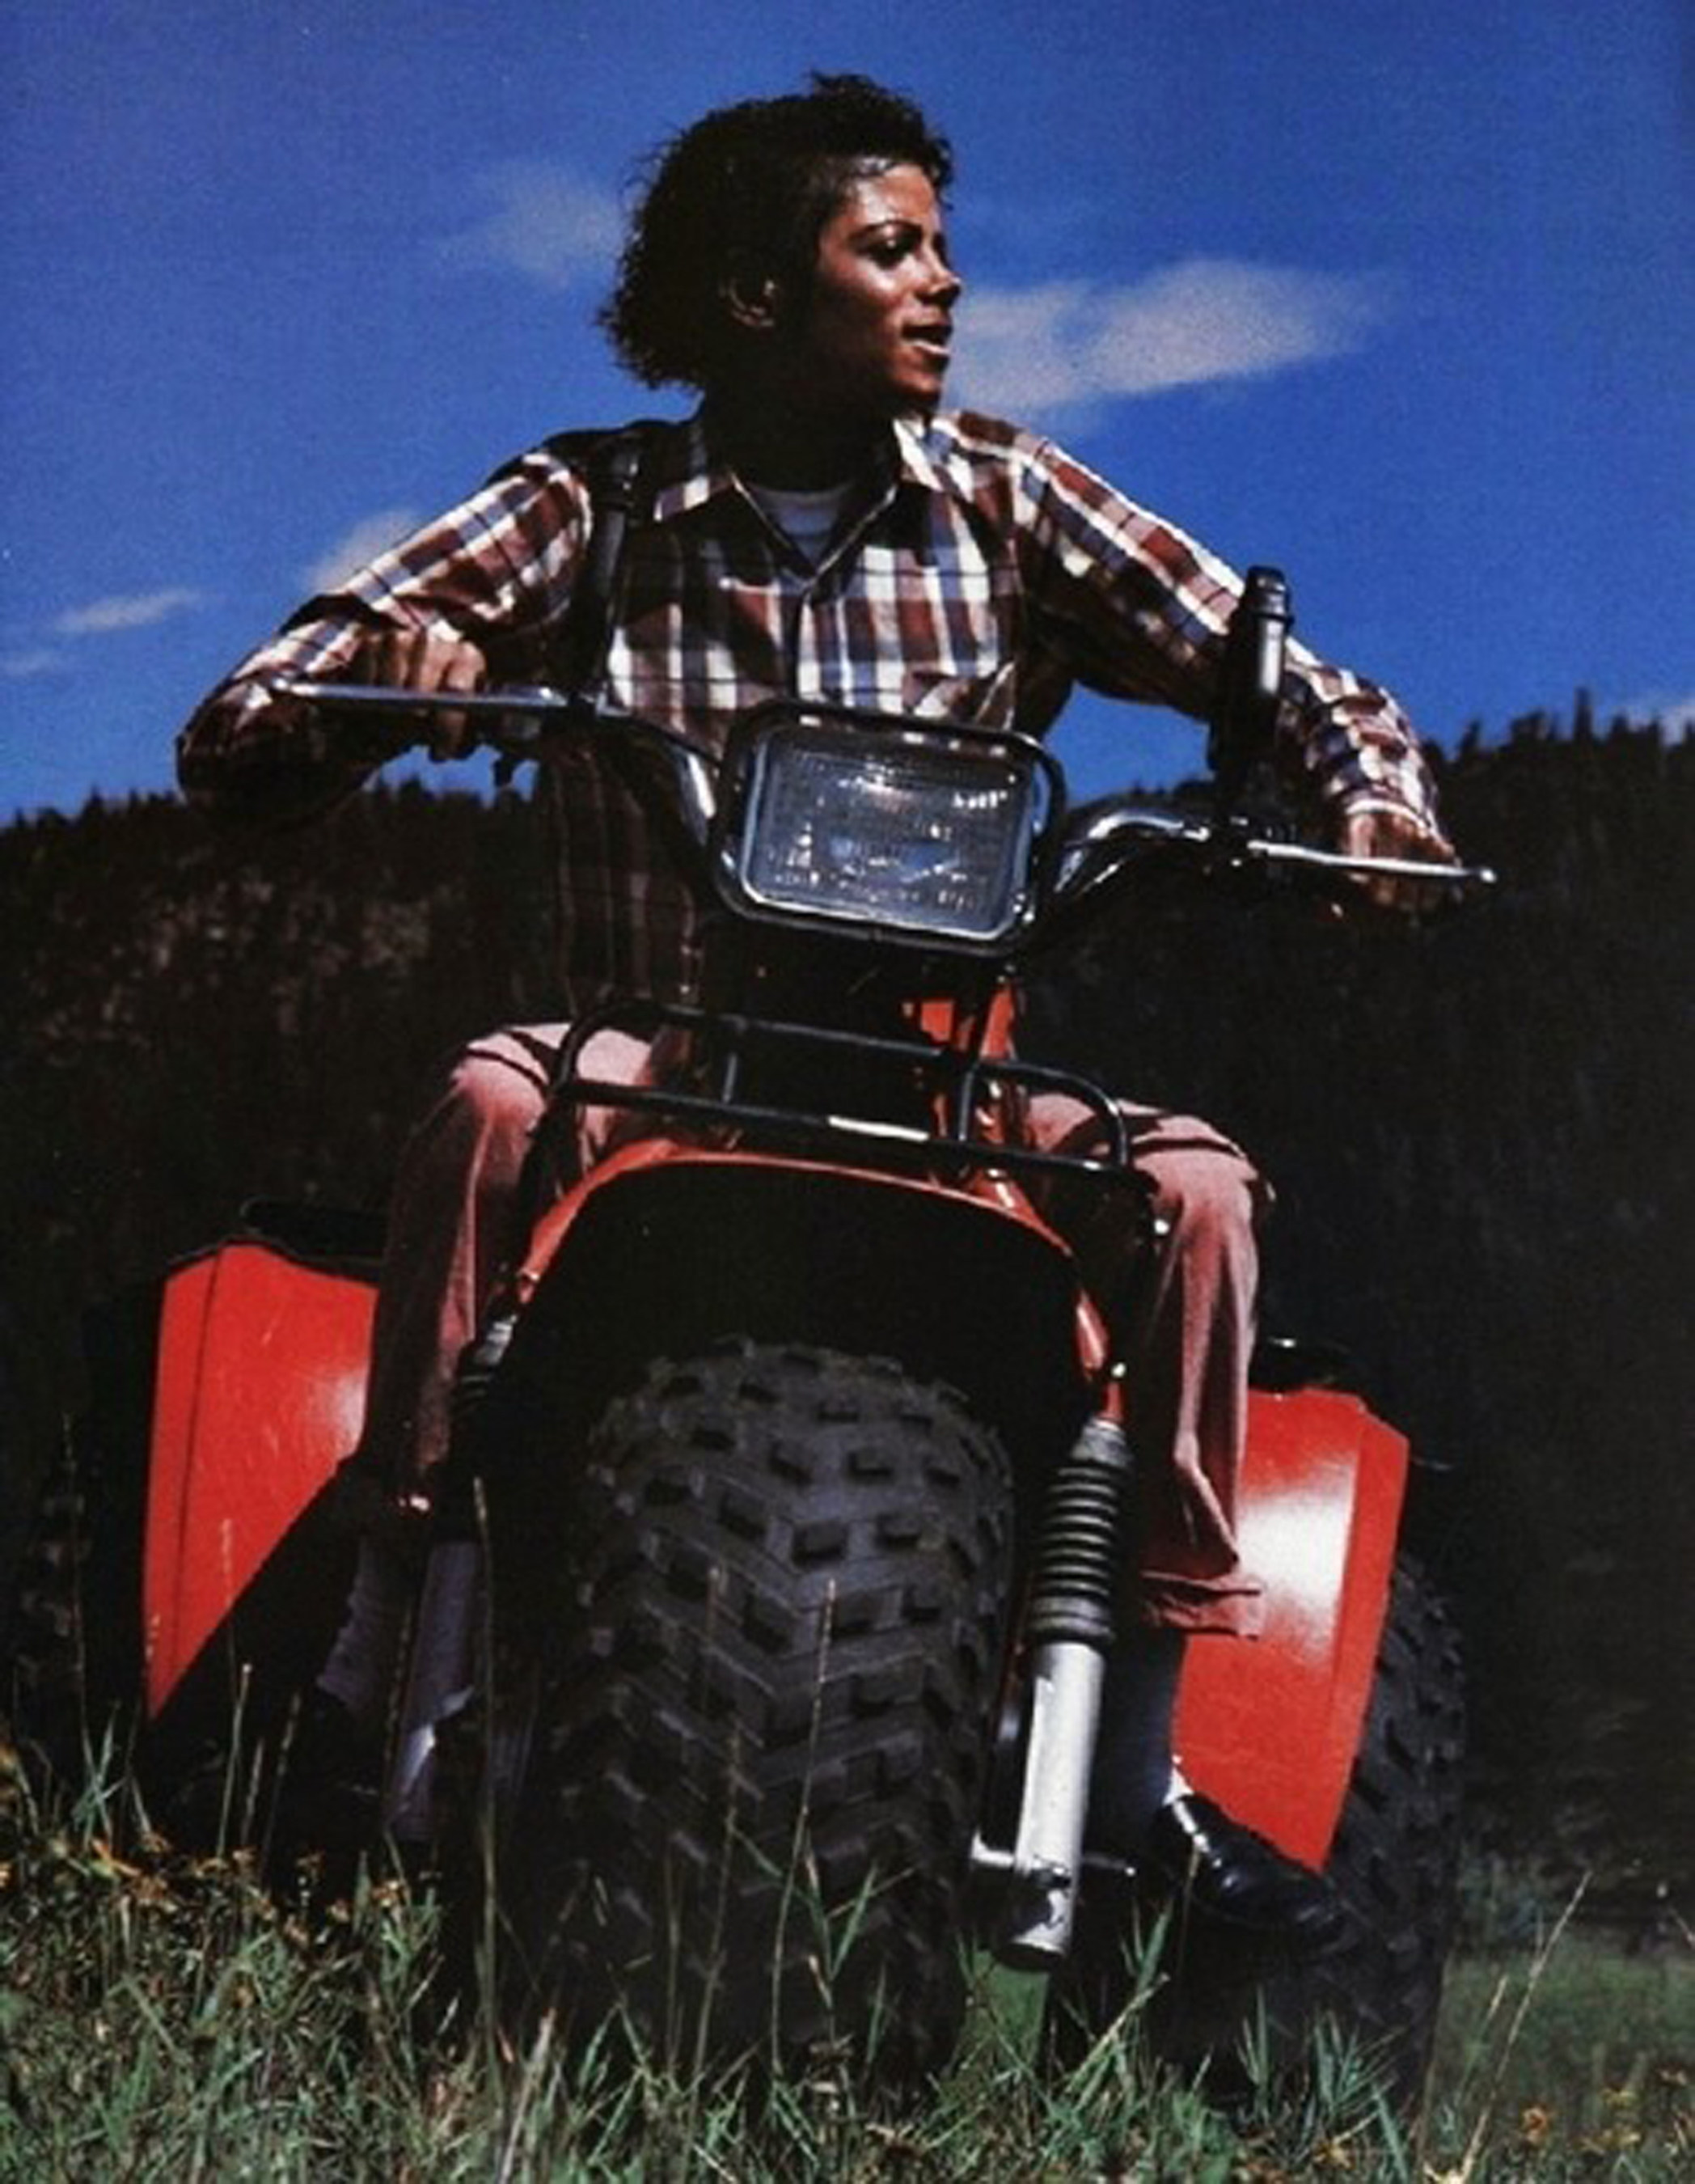 Photo credit: Sam Emerson. Michael Jackson riding a Honda ATC three wheeler at Caribou Ranch in 1984. Jackson spent a private week at Caribou after the Denver leg of The Jacksons' Victory Tour. This vehicle is being sold at auction by Leslie Hindman Auctioneers on January 24. It is being sold with a Victory Tour album and the People Weekly Extra featuring a photo of Michael using the ATC.